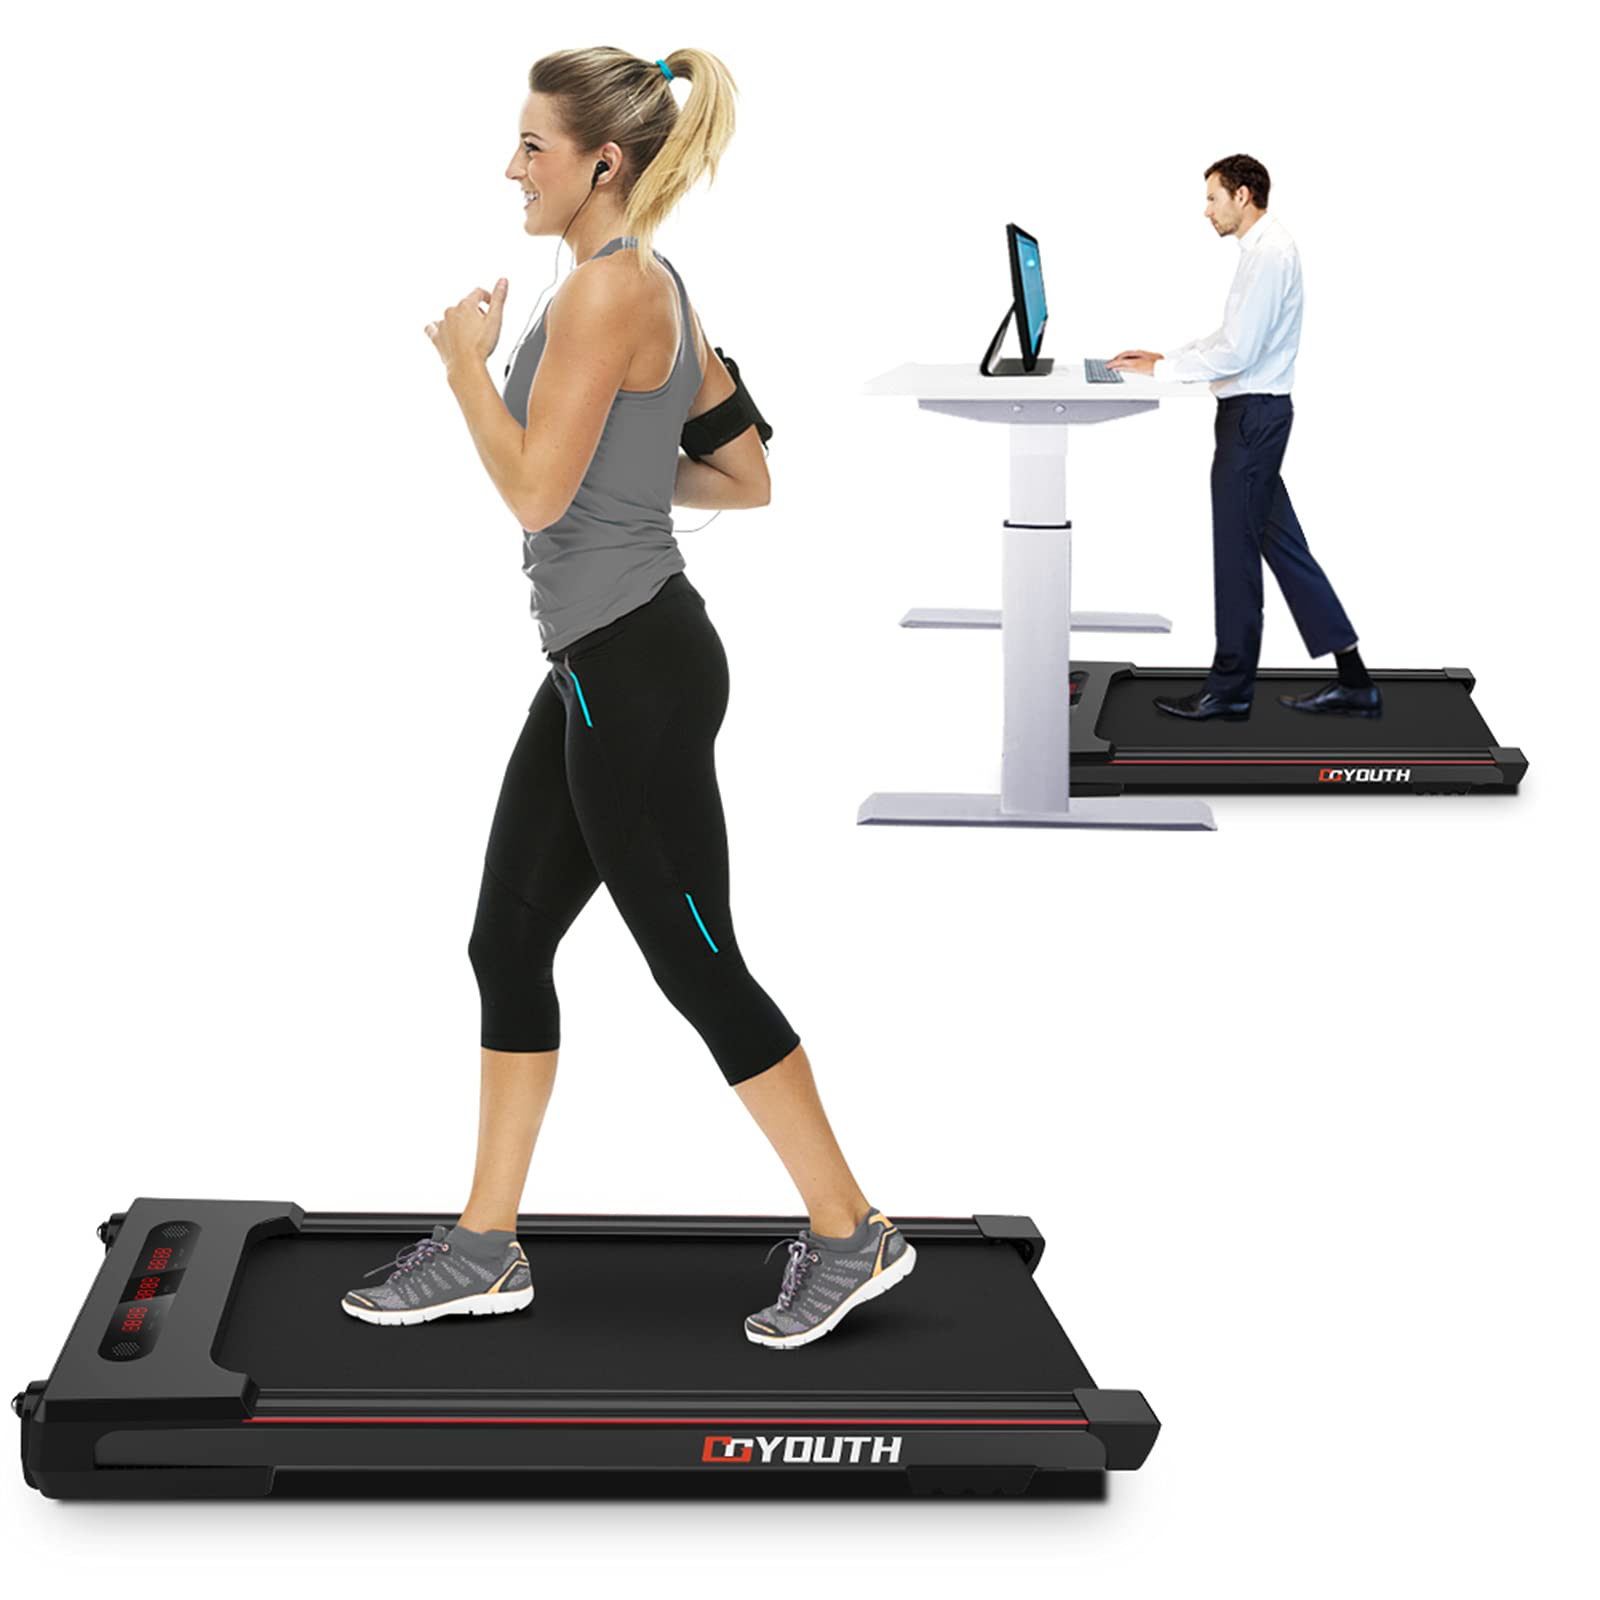 GOYOUTH Under Desk Treadmill Electric Walking Jogging Exercise Machine for Home/Office Use - image 1 of 7